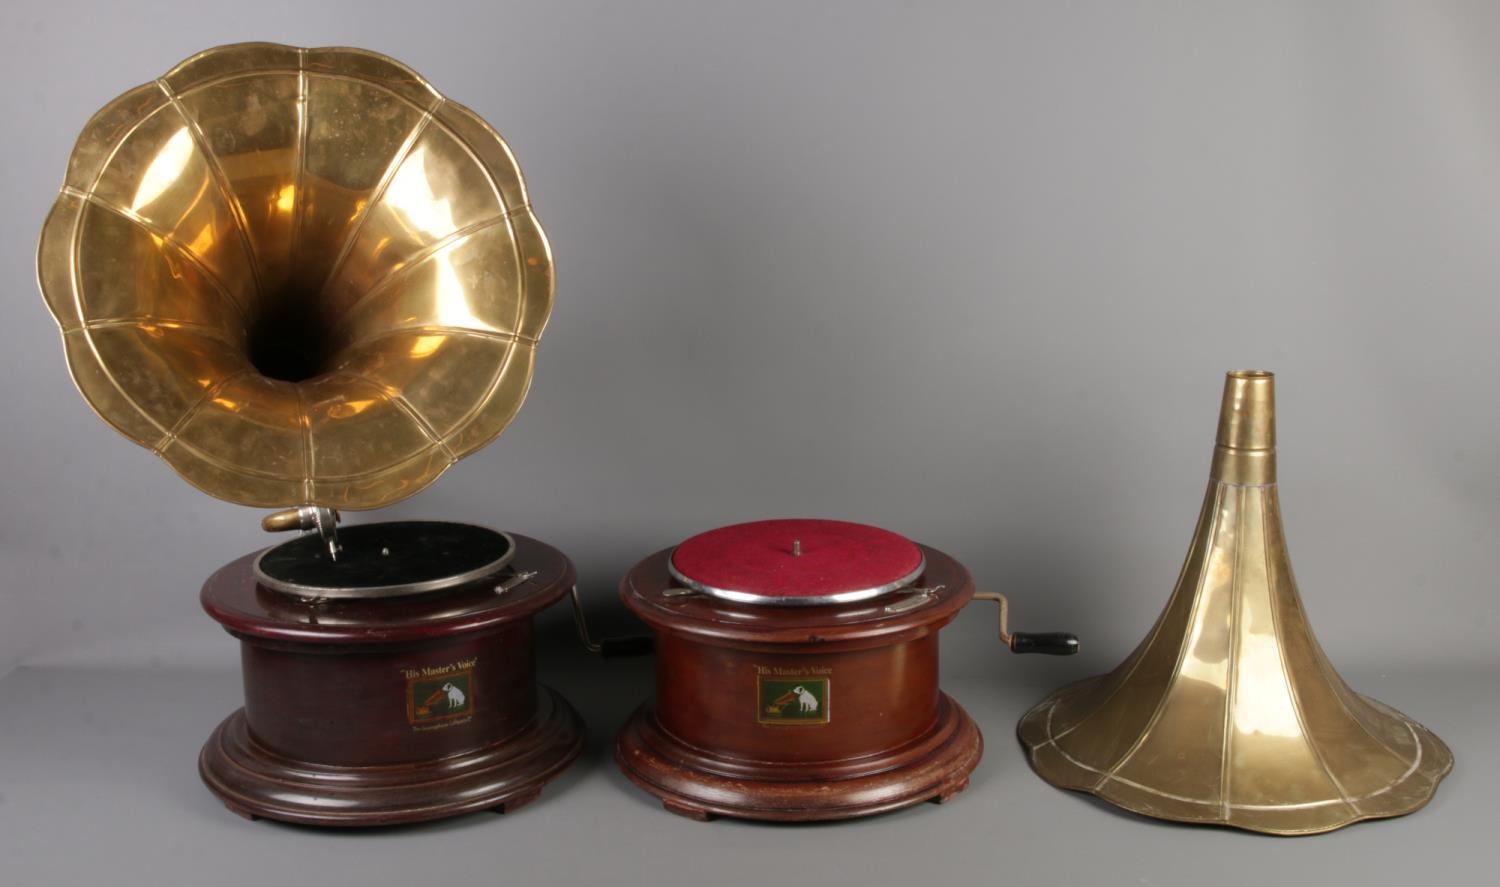 Two Vintage 'His Masters Voice' wooden gramophones on circular bases. Both with brass funnels, one